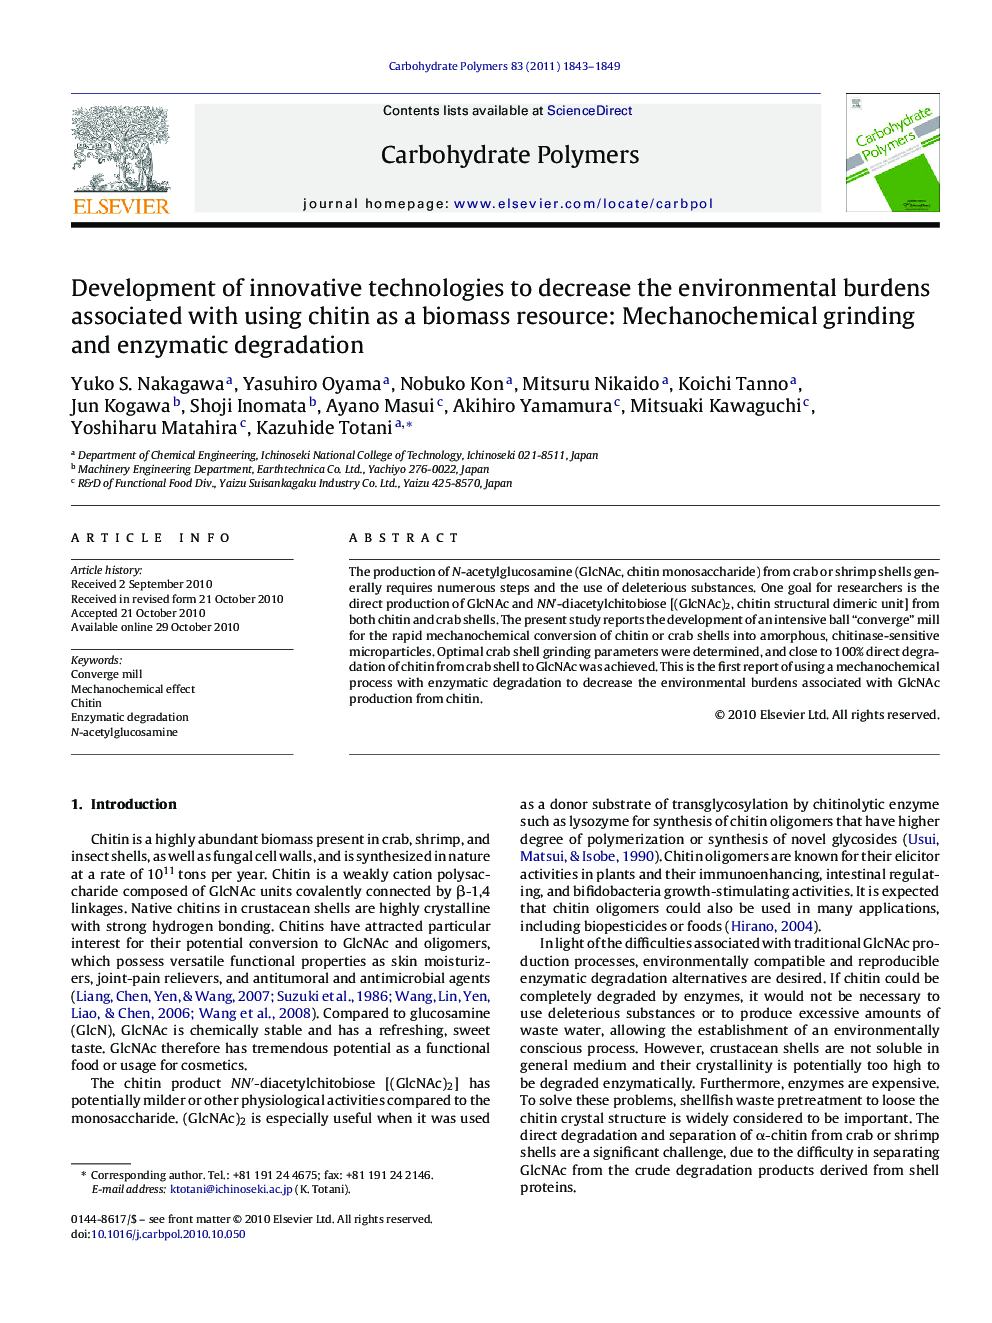 Development of innovative technologies to decrease the environmental burdens associated with using chitin as a biomass resource: Mechanochemical grinding and enzymatic degradation